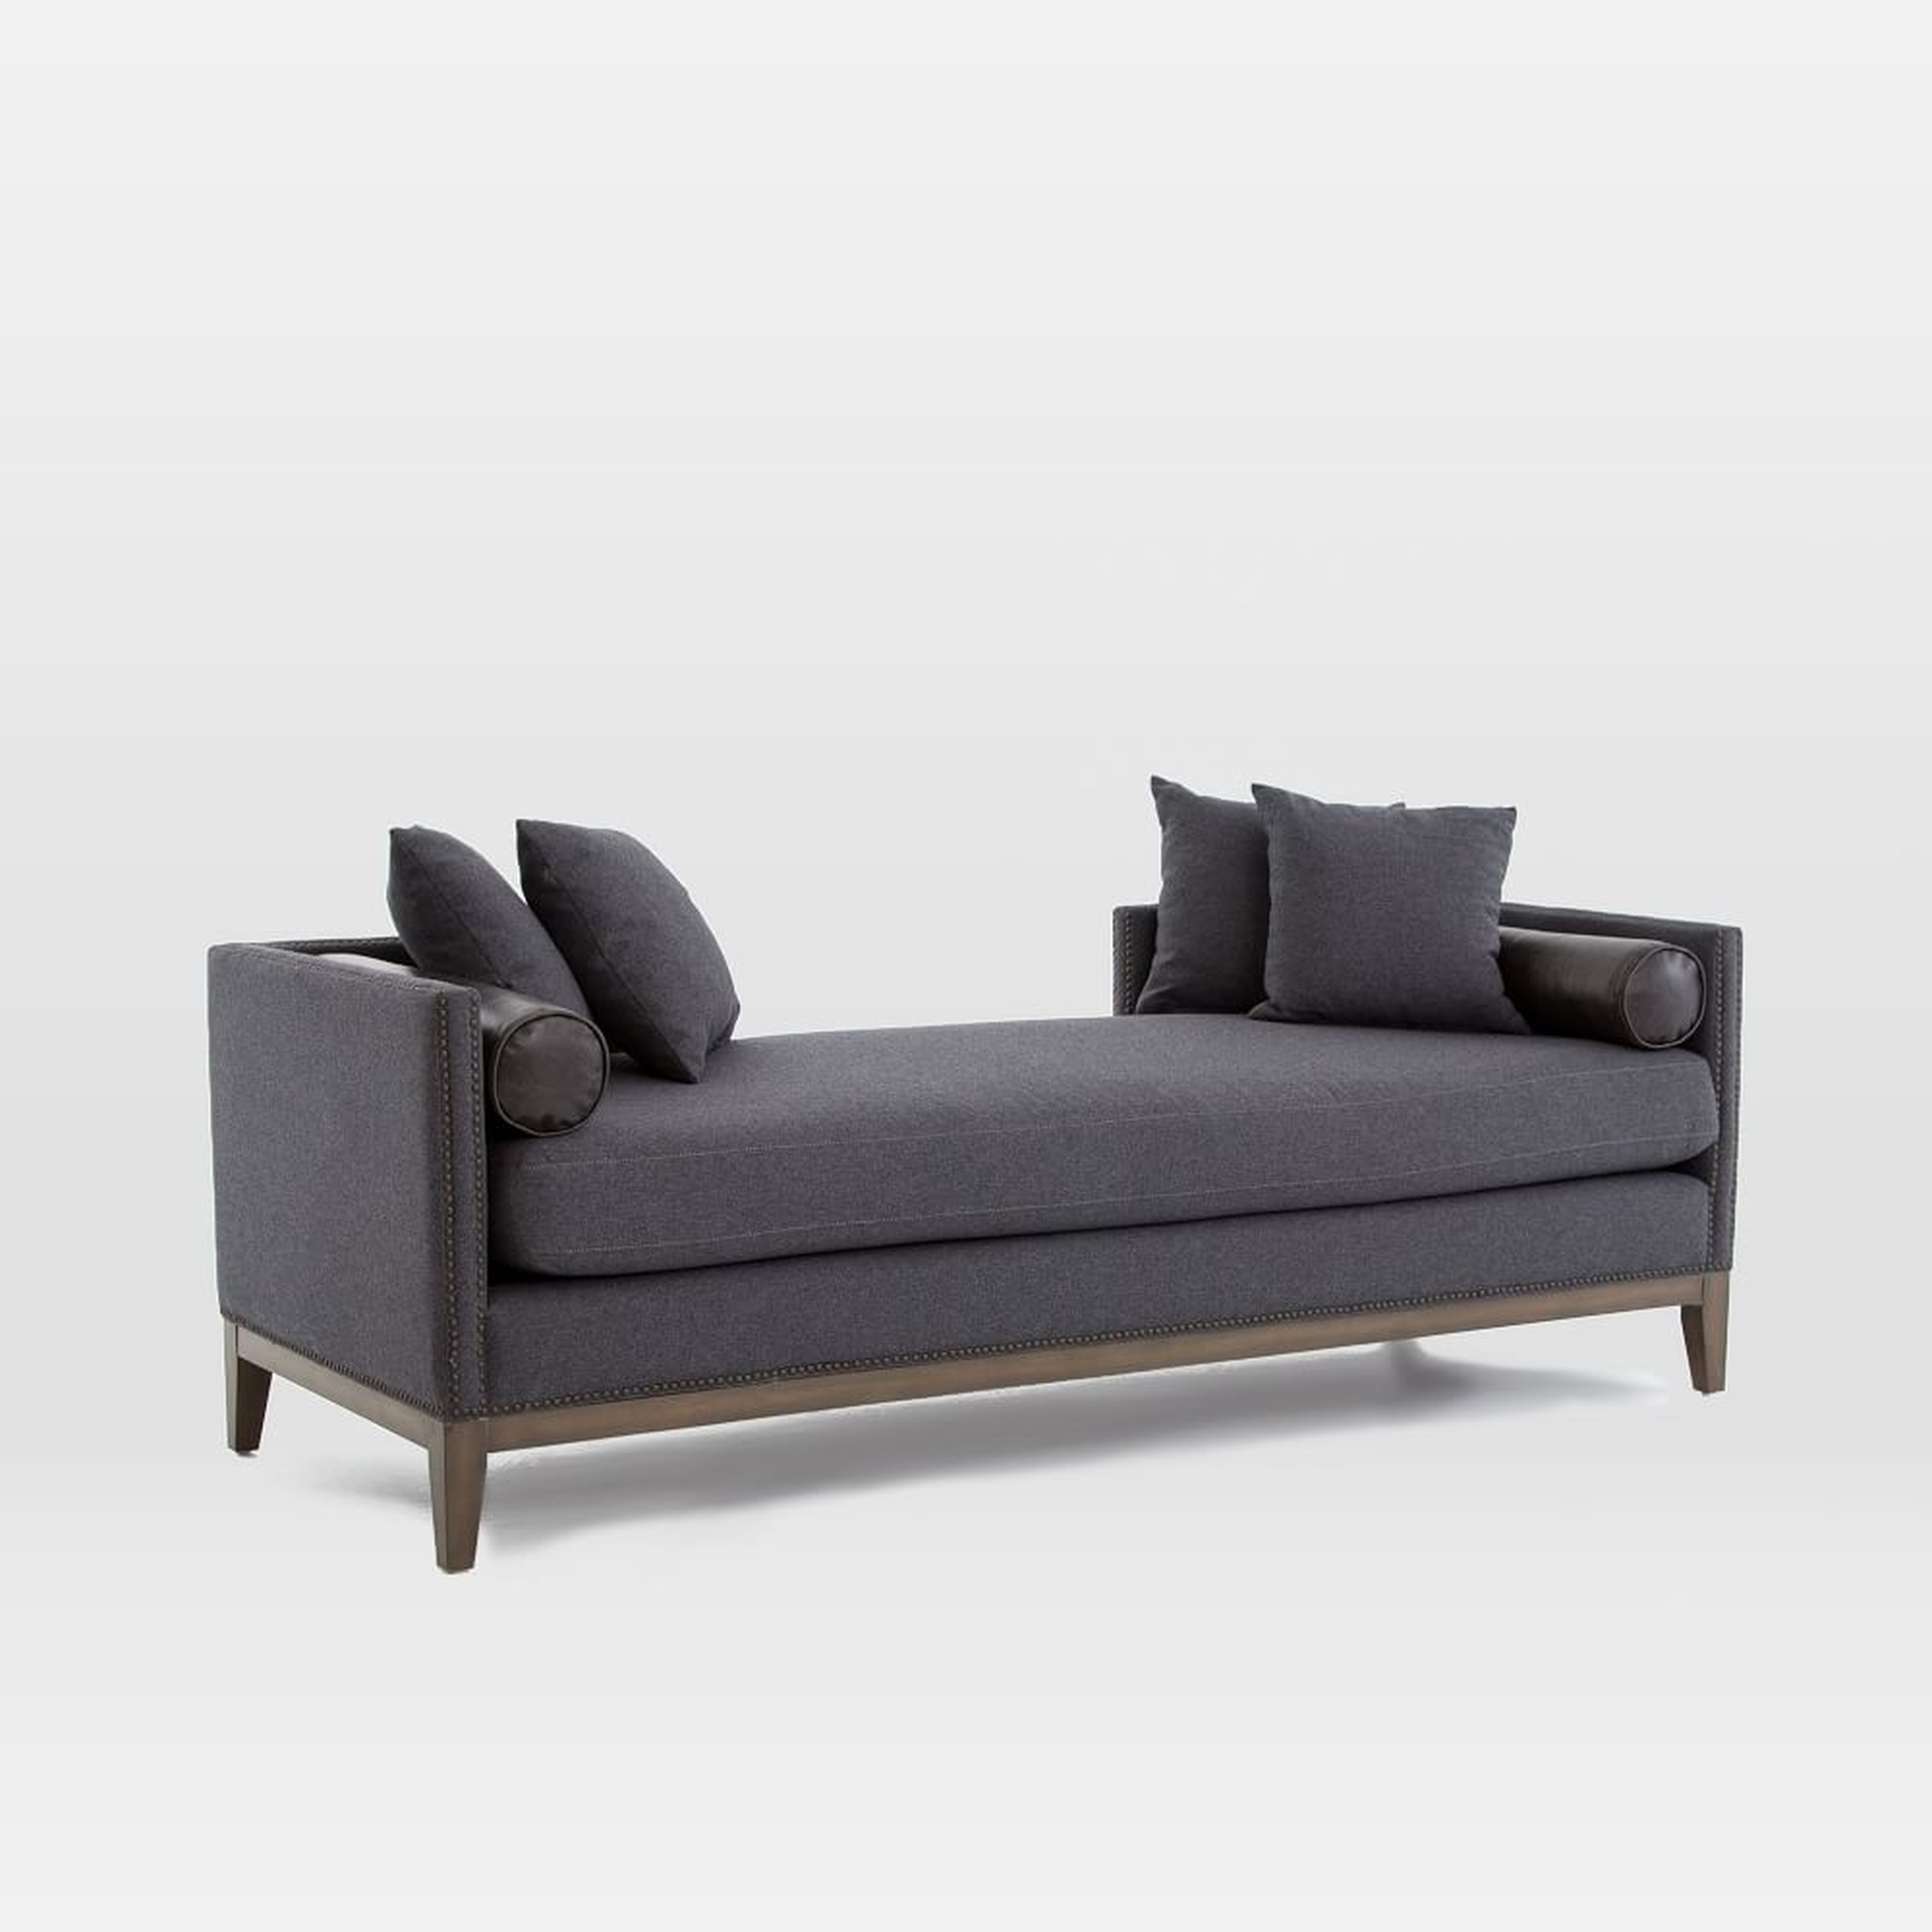 Upholstered Nailhead Double Chaise - West Elm